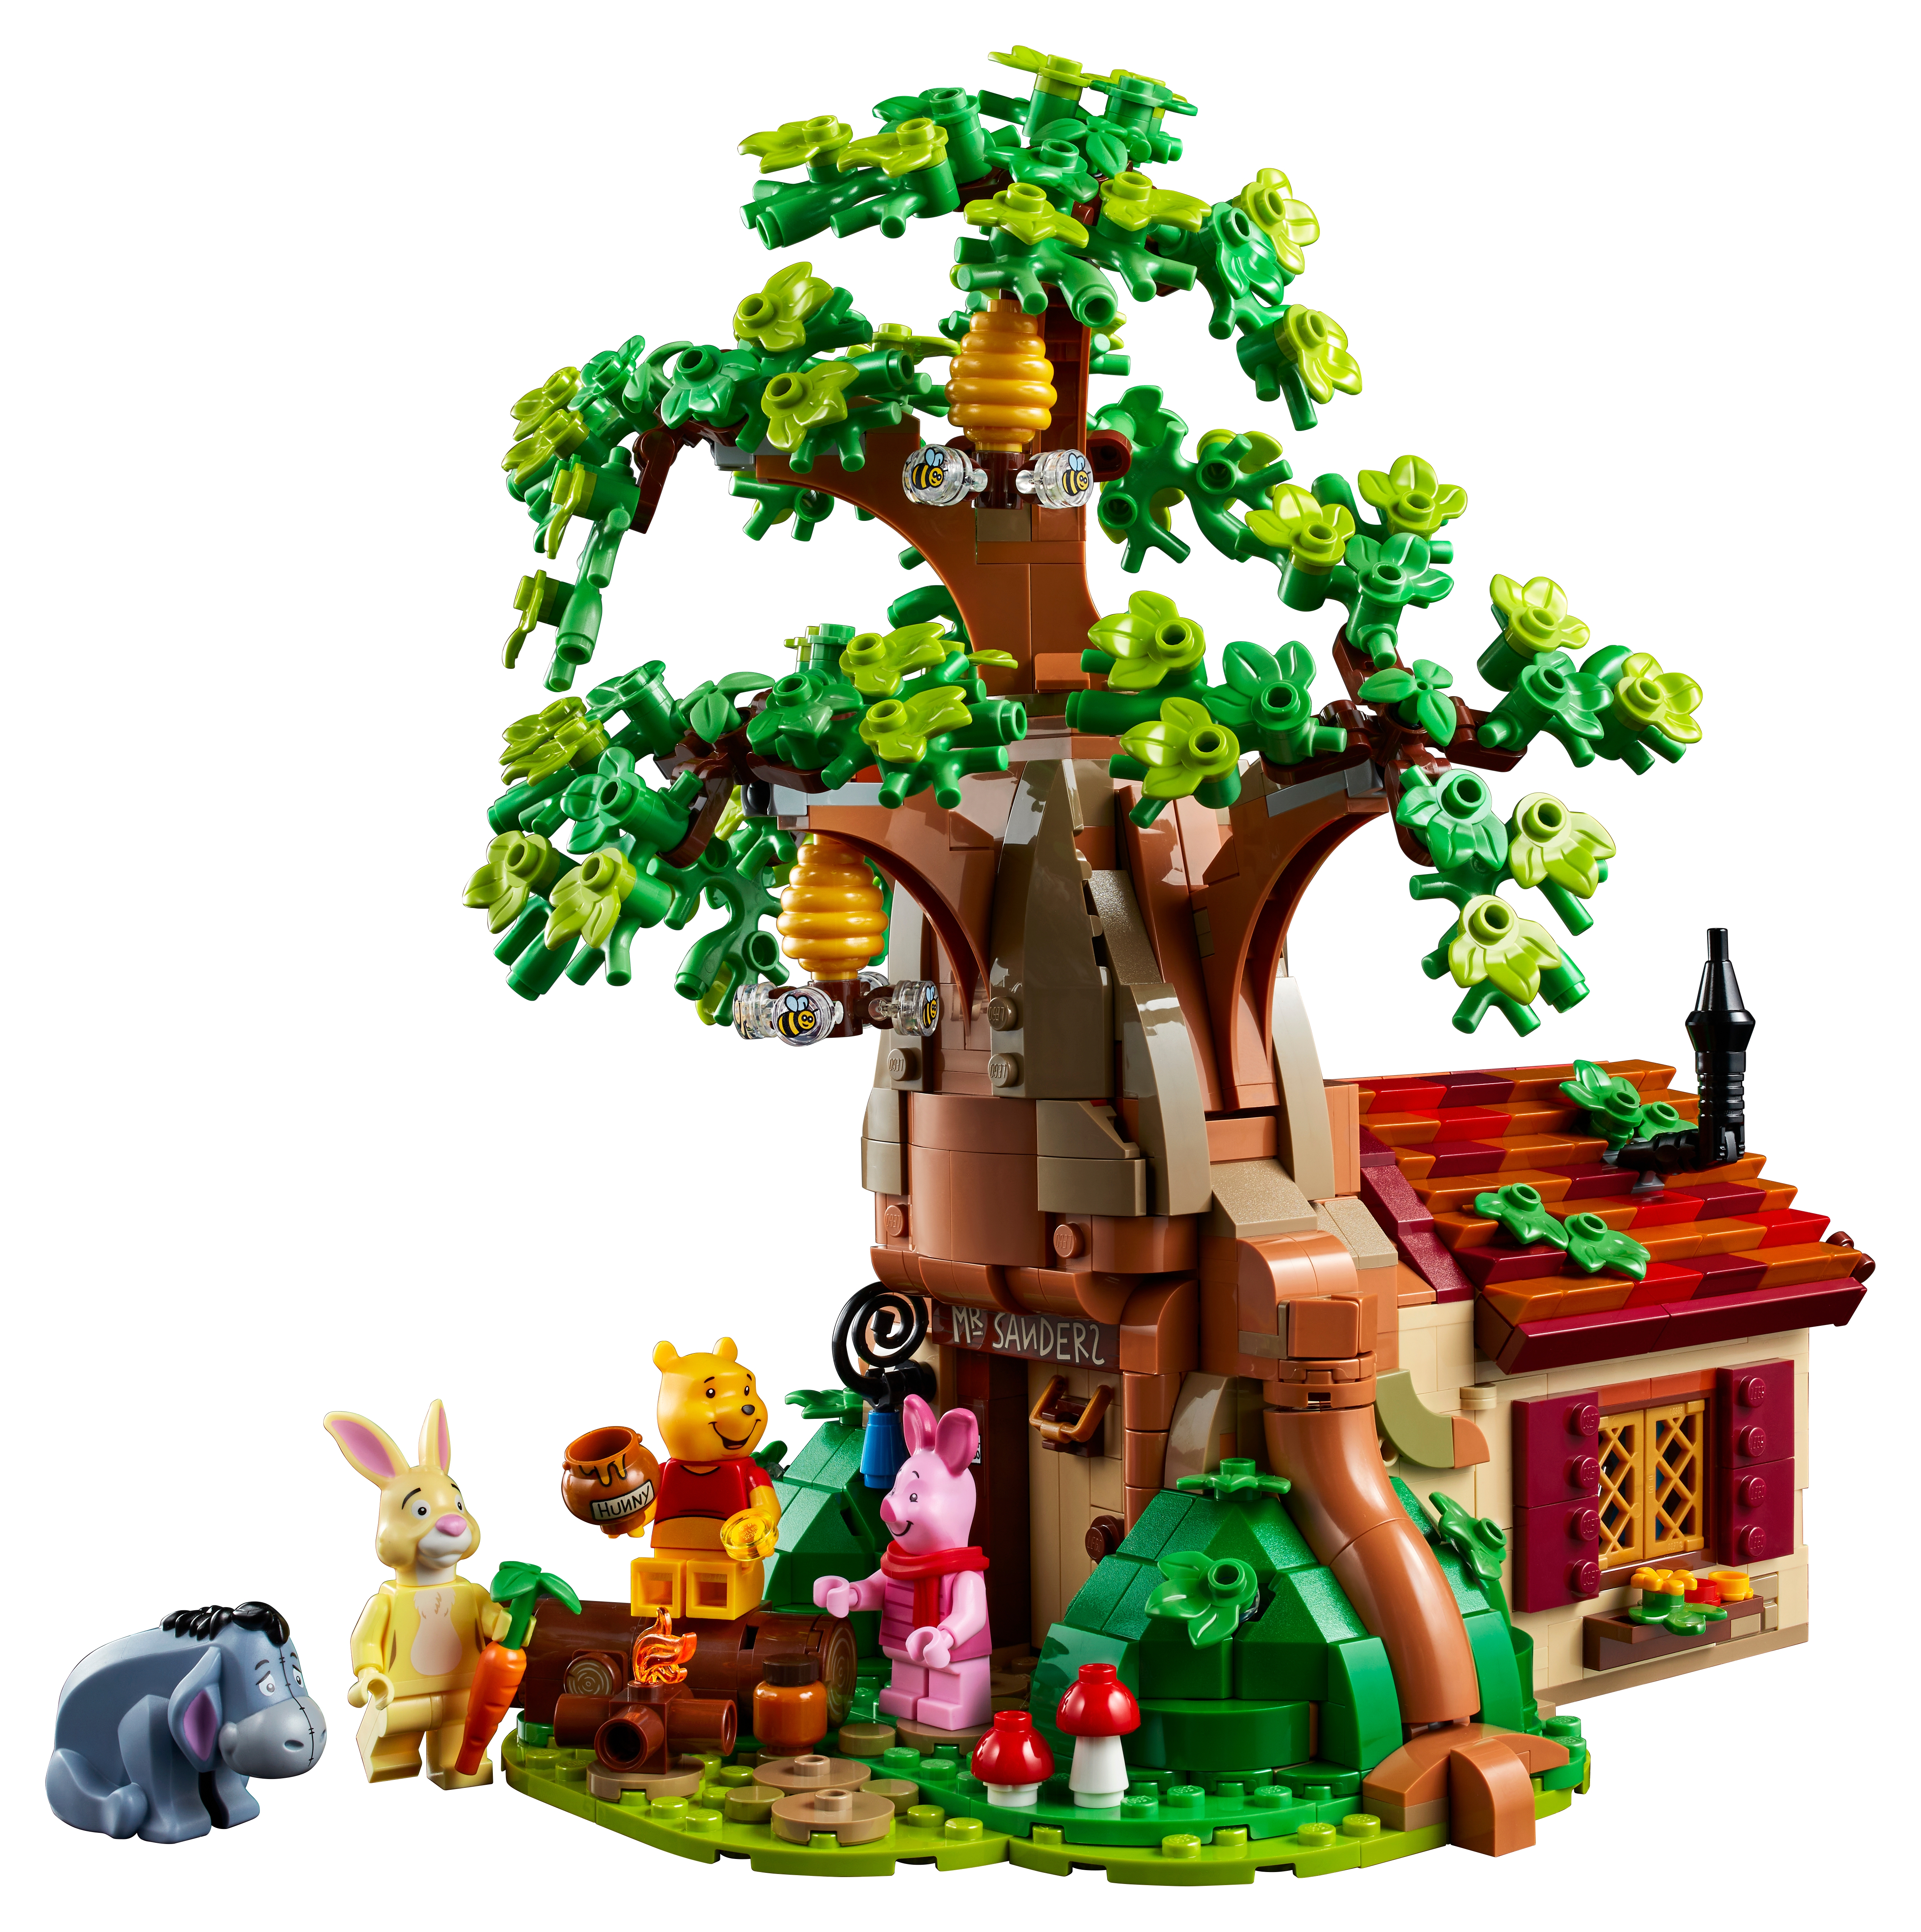 Winnie the Pooh 21326 | Ideas | Buy online at the Official LEGO